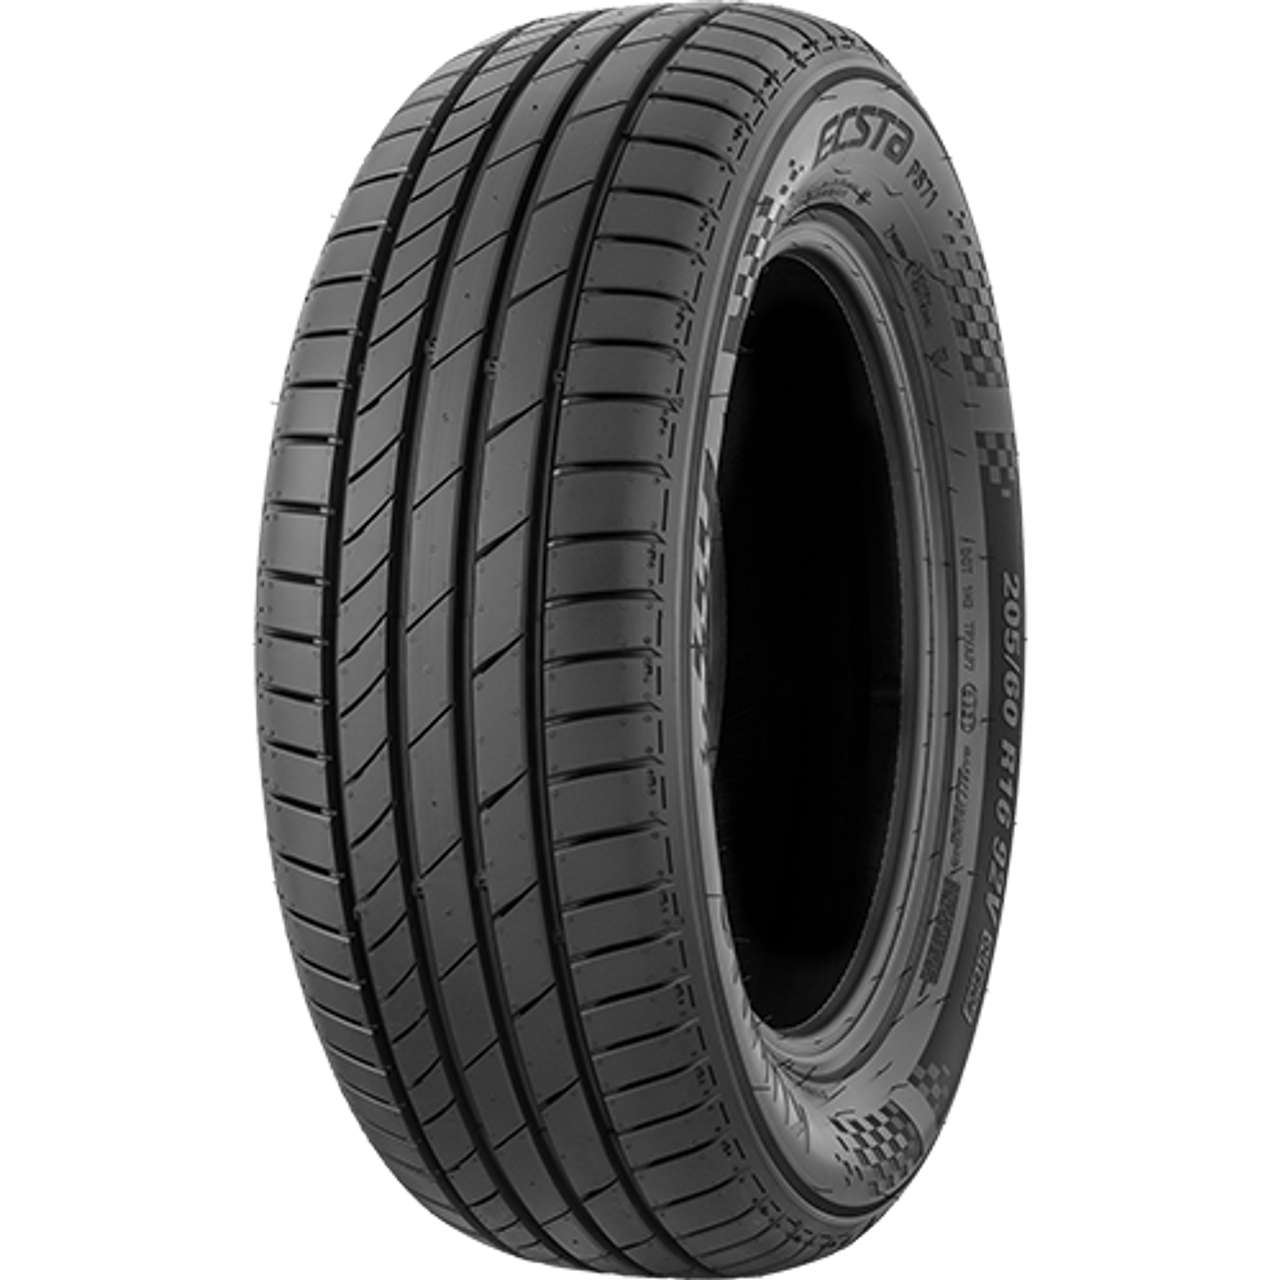 KUMHO ECSTA PS71 235/45ZR18 98Y BSW